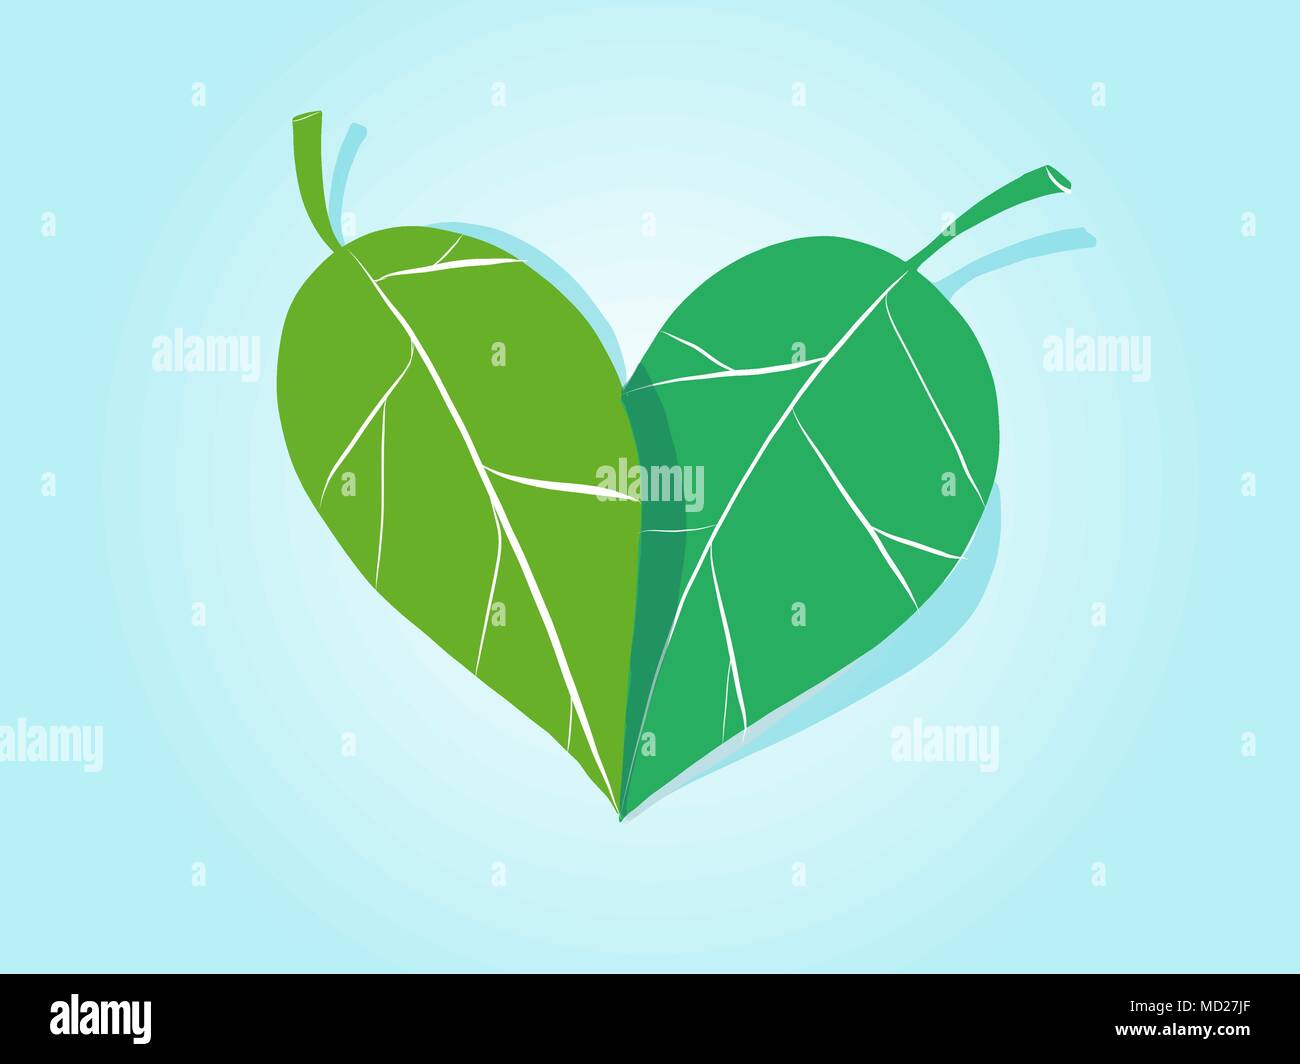 Kepp a healthy life style with biologival food Stock Vector